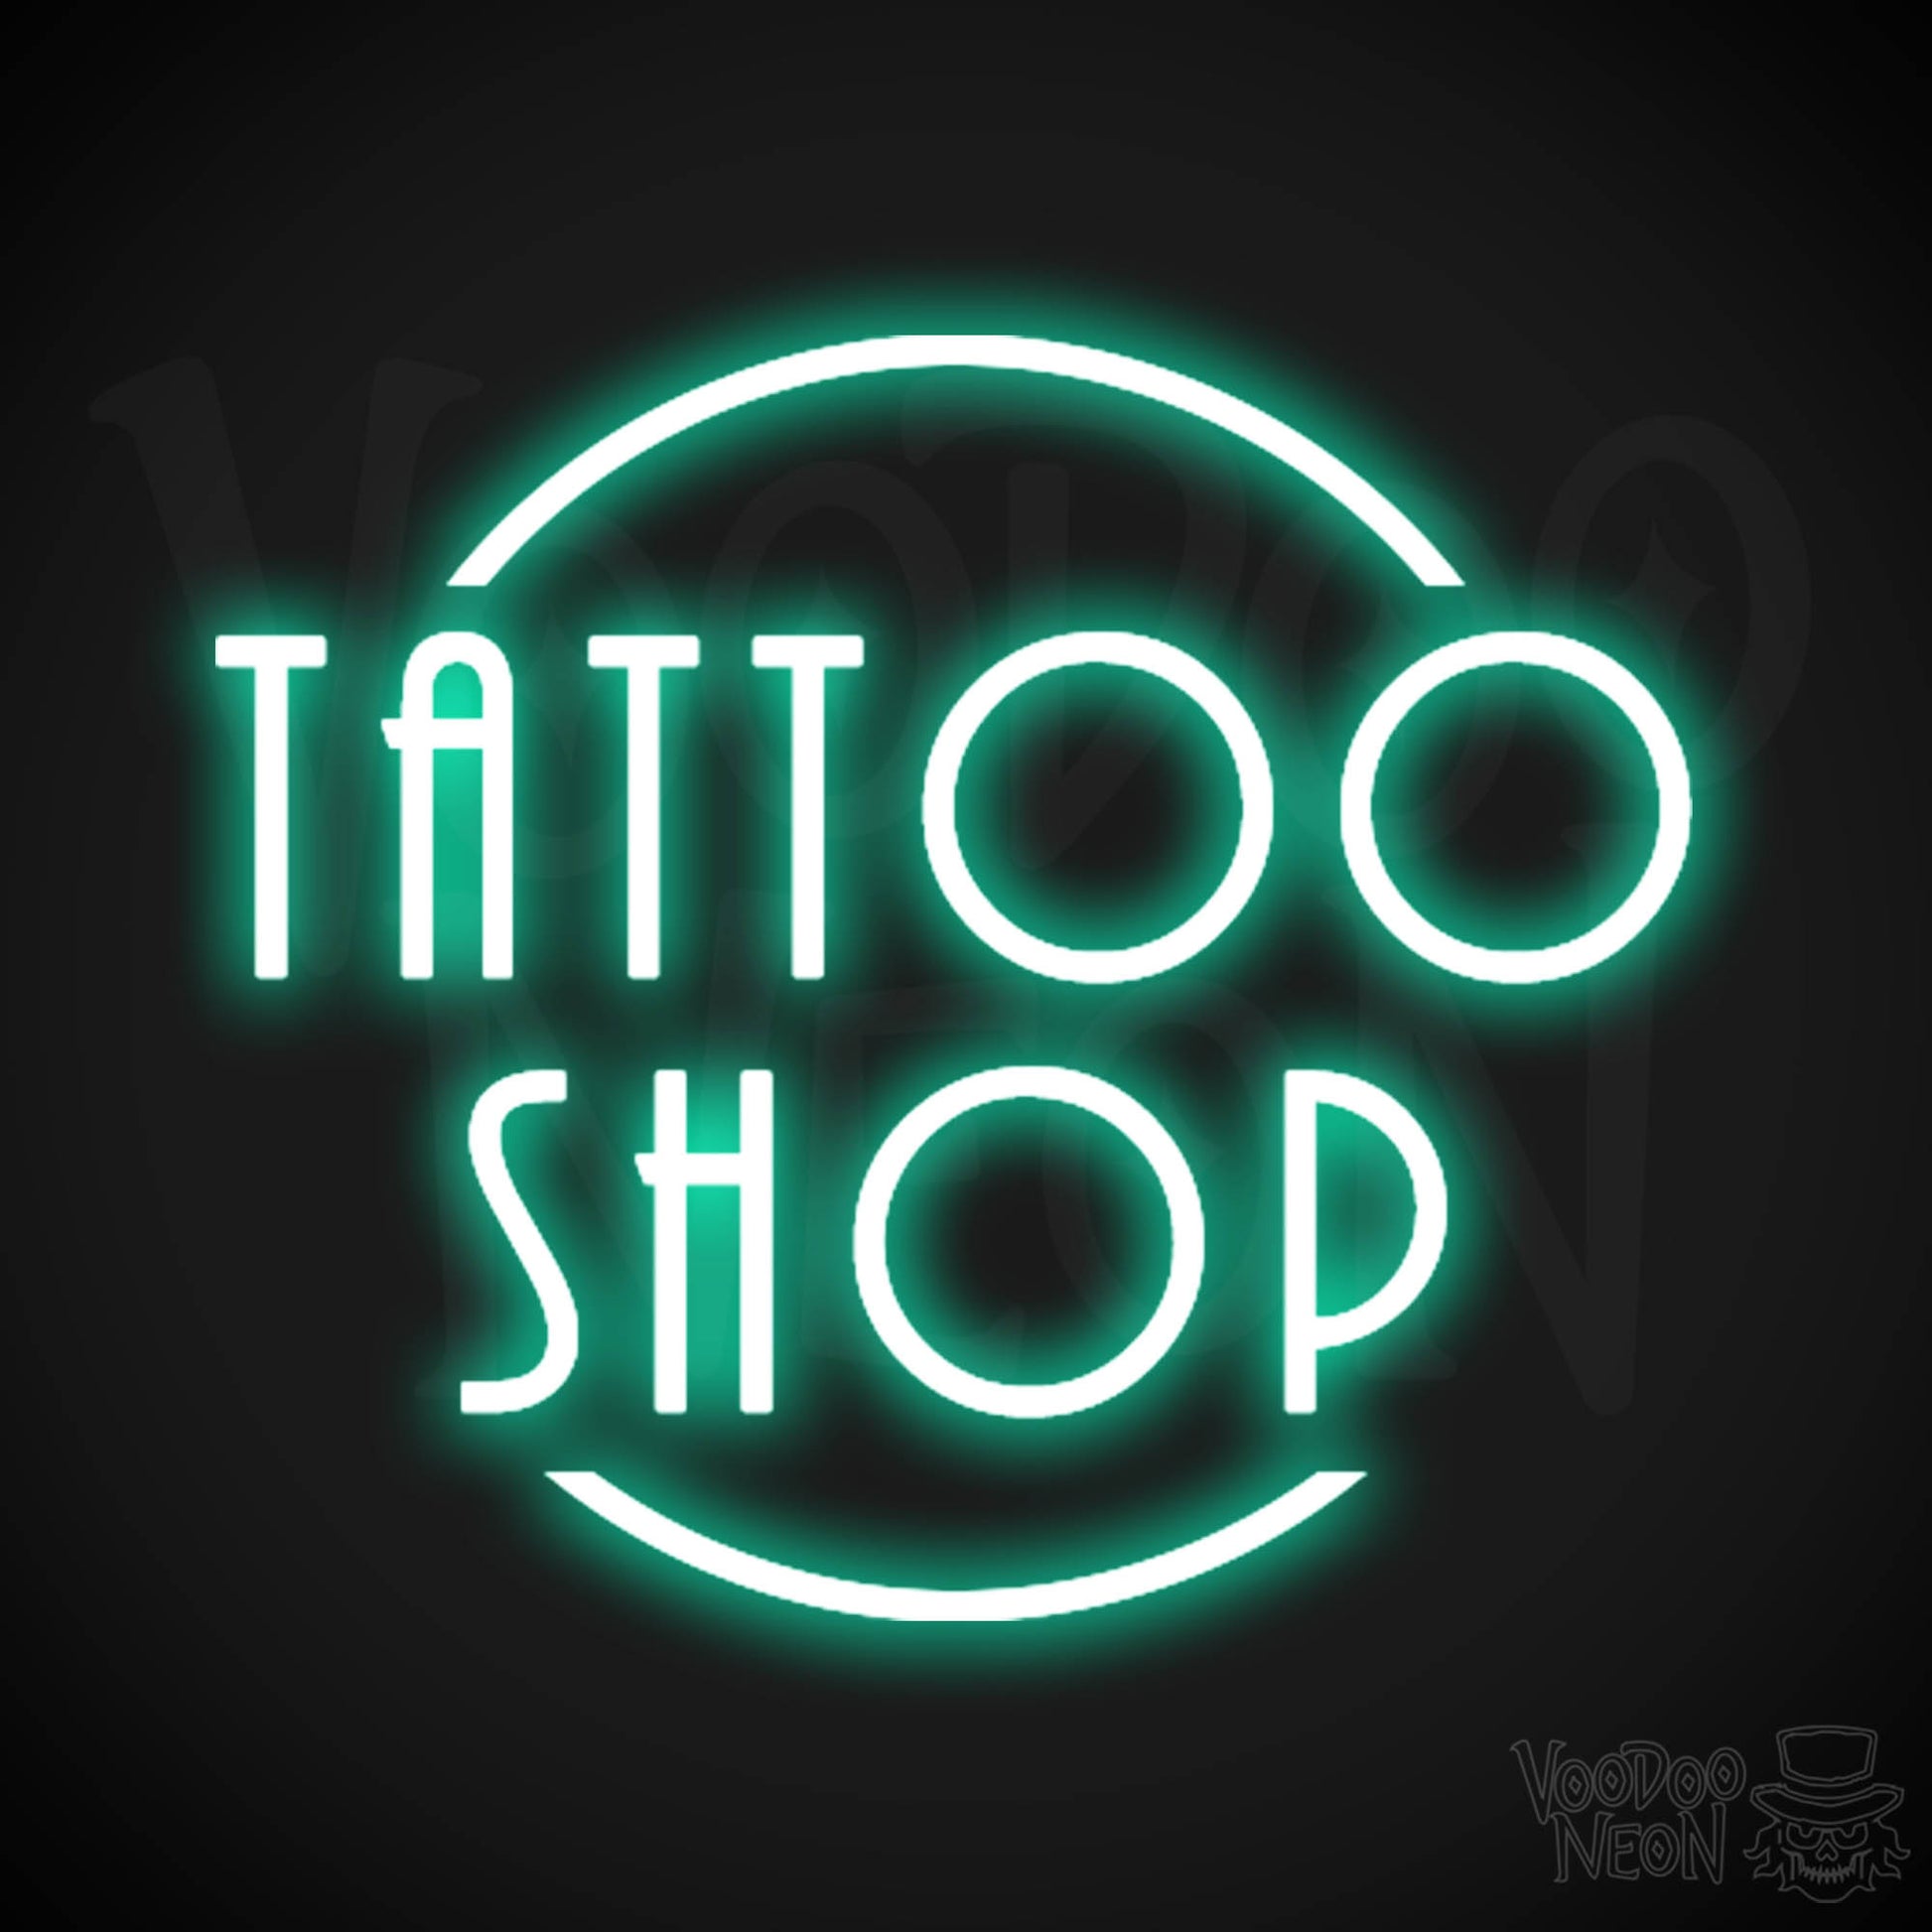 Tattoo Shop Neon Sign - Neon Tattoo Shop Sign - Tattoo Sign - Color Light Green